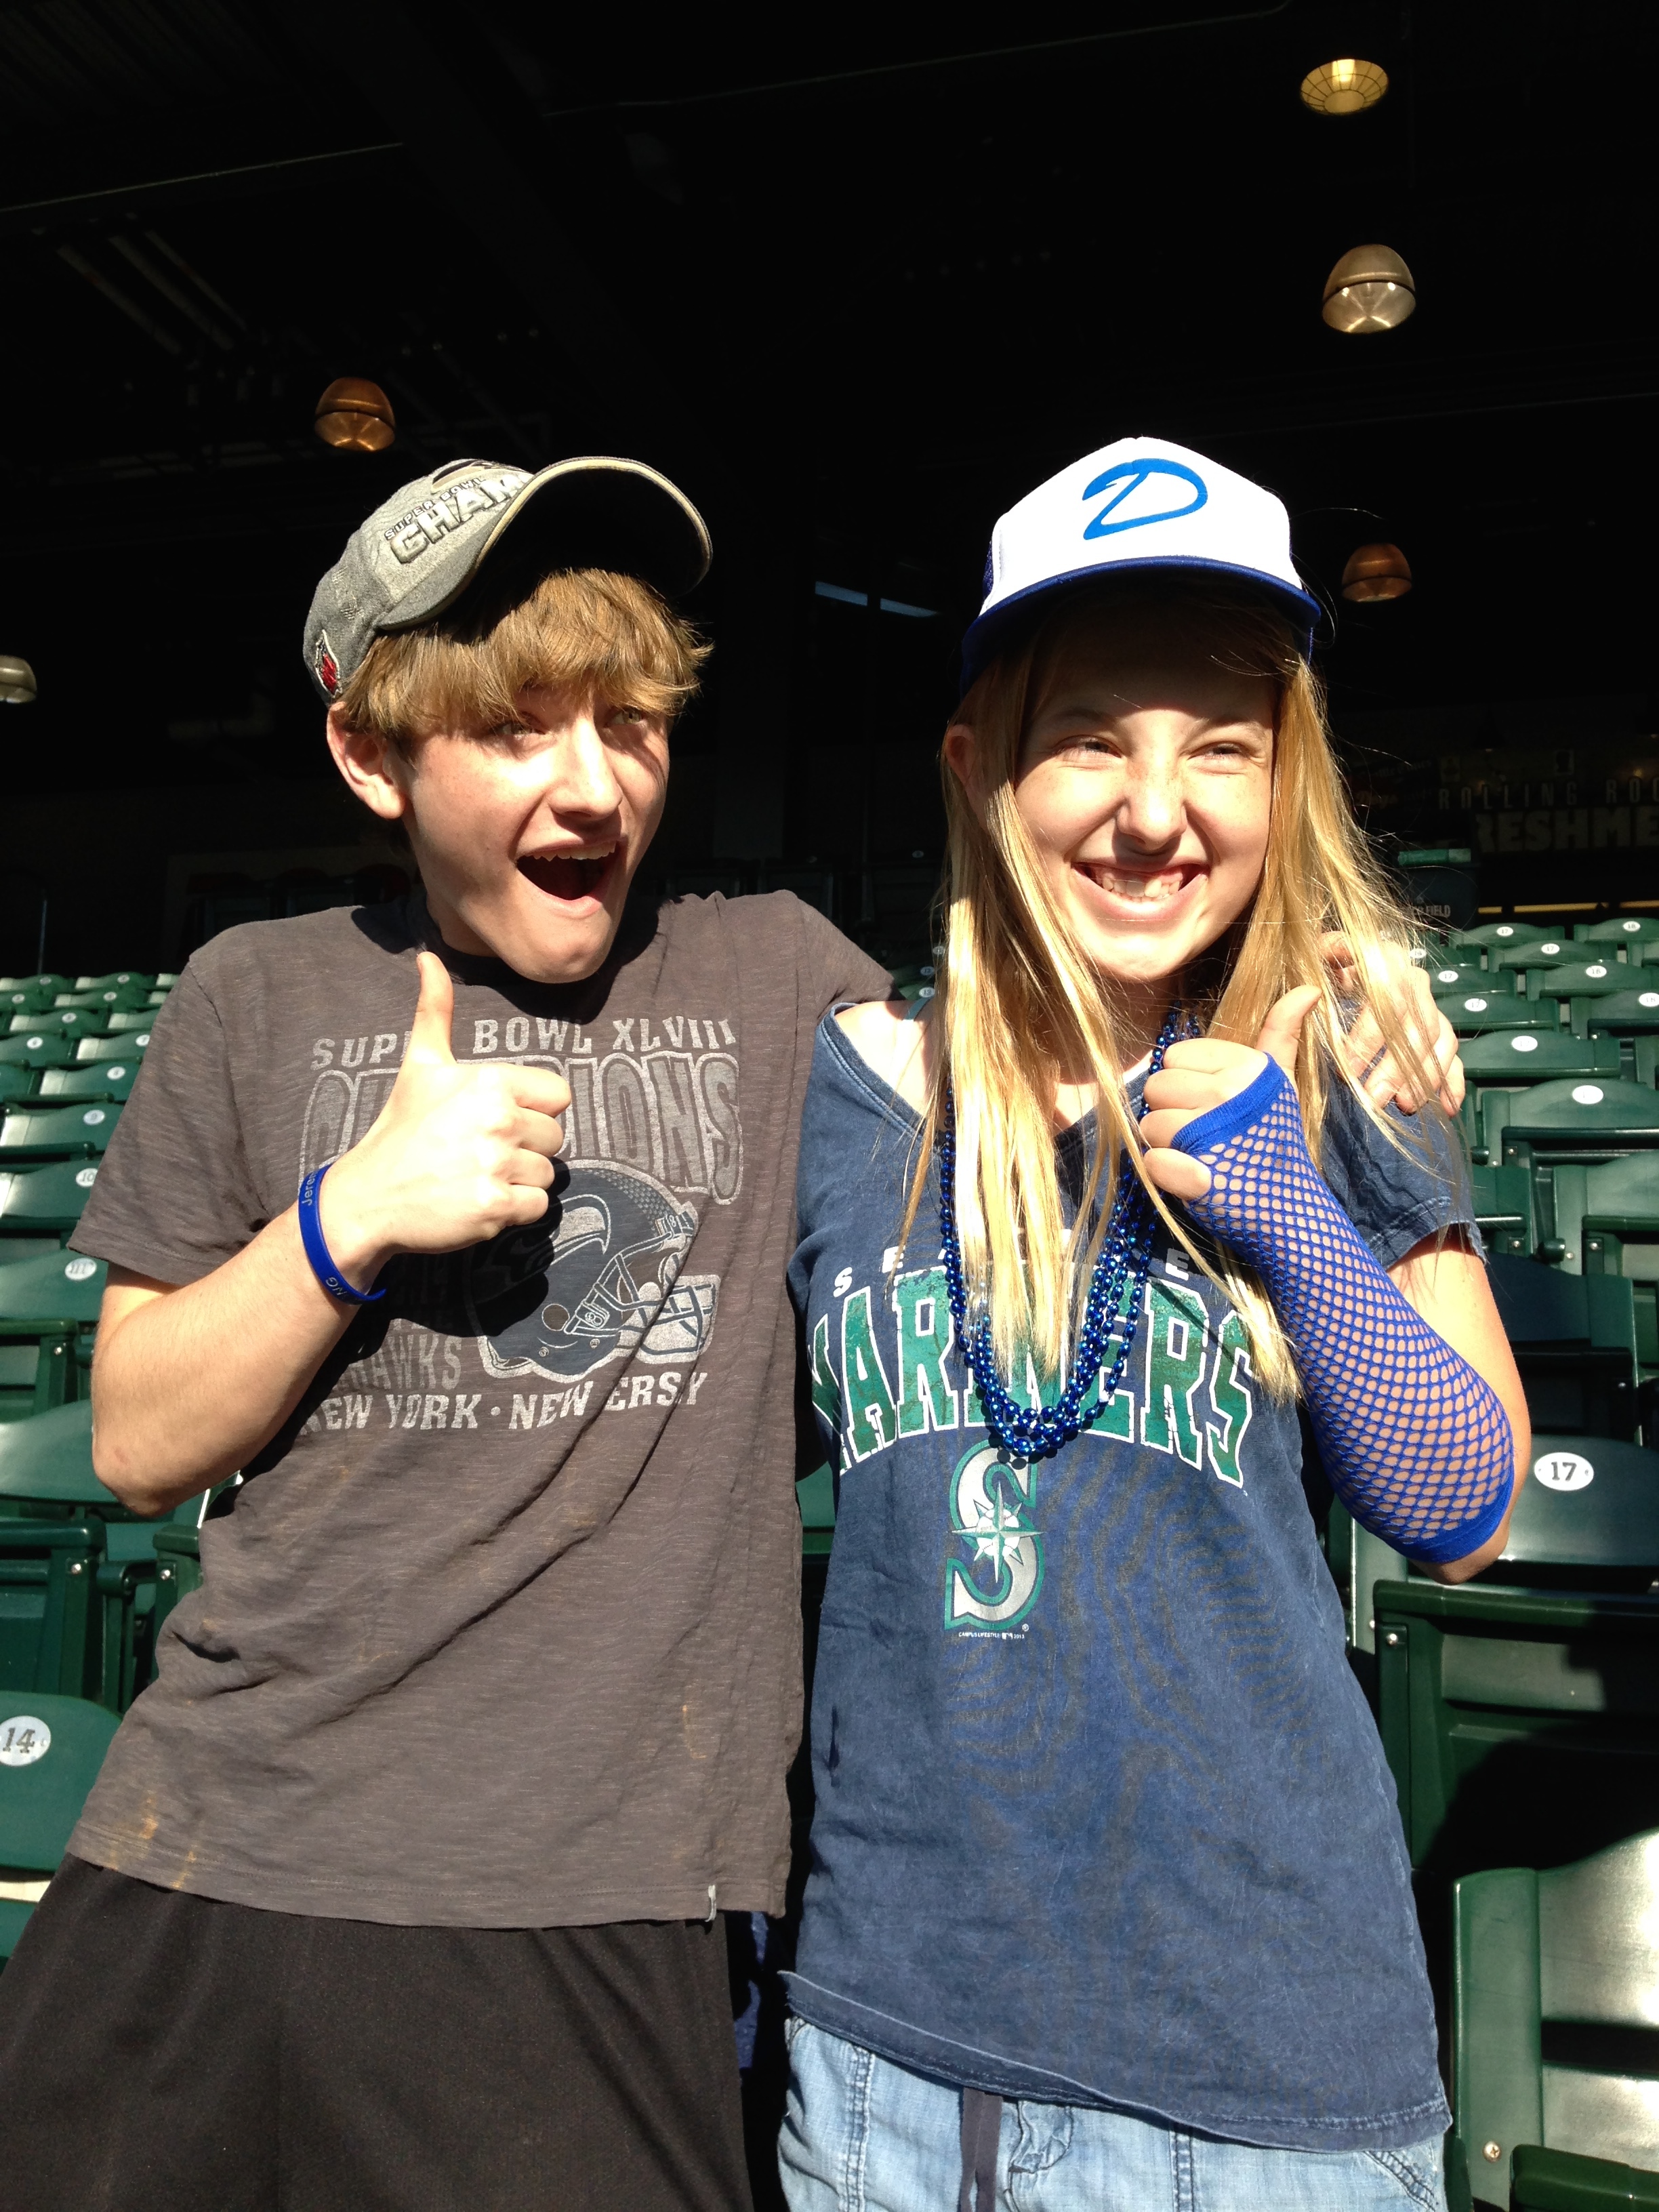 Laura with her big brother Nathan Gamble at a Mariners game.